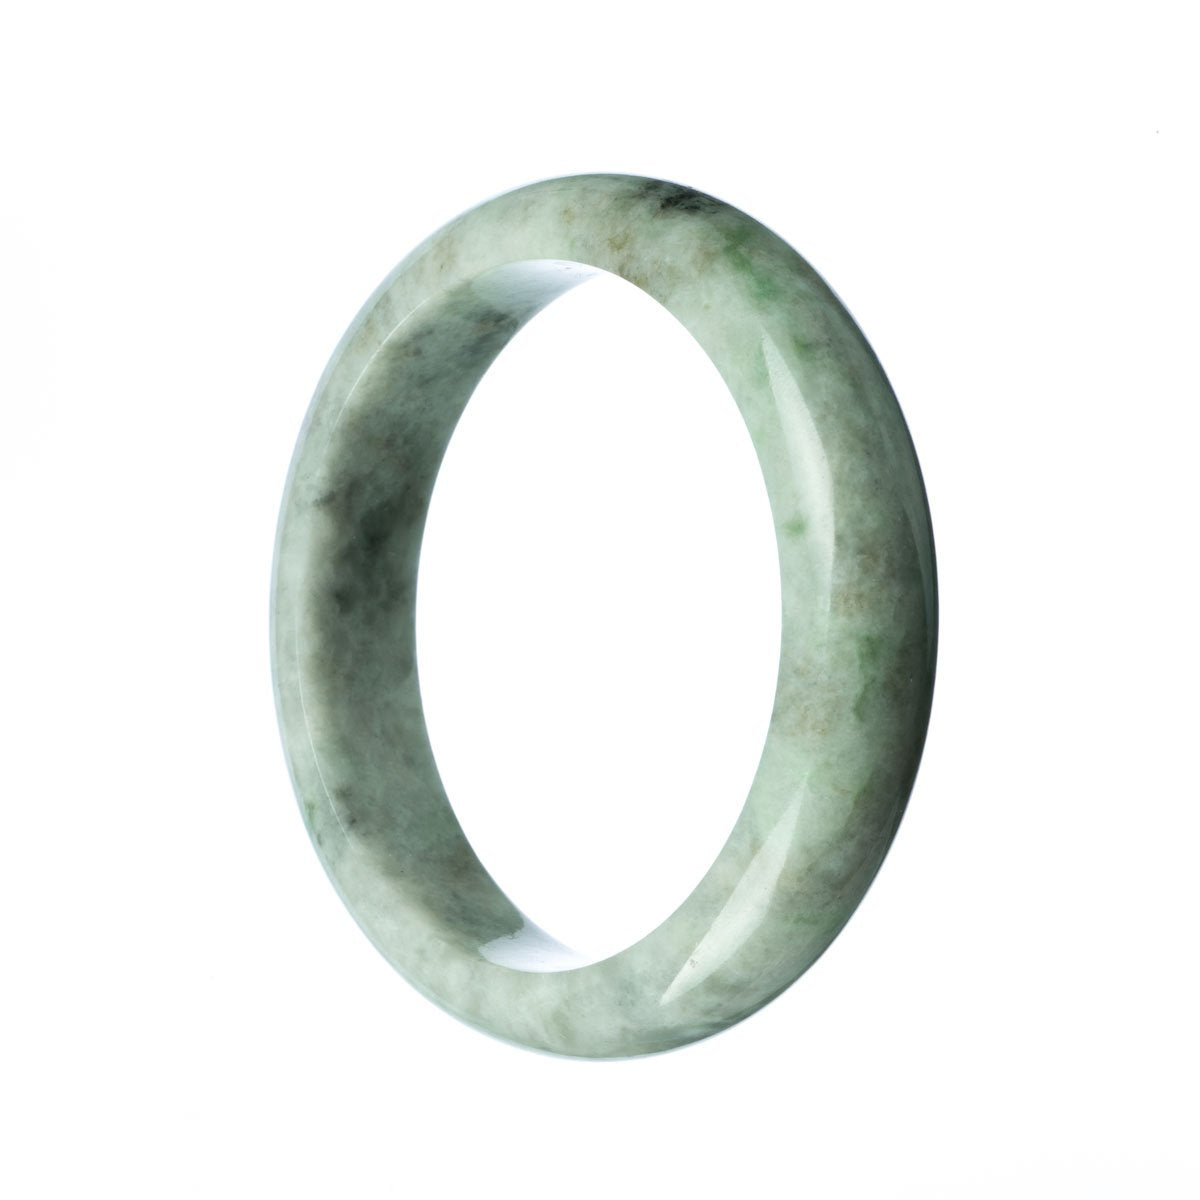 A half moon-shaped bangle bracelet made of genuine natural grey Burmese jade, available in 63mm size.